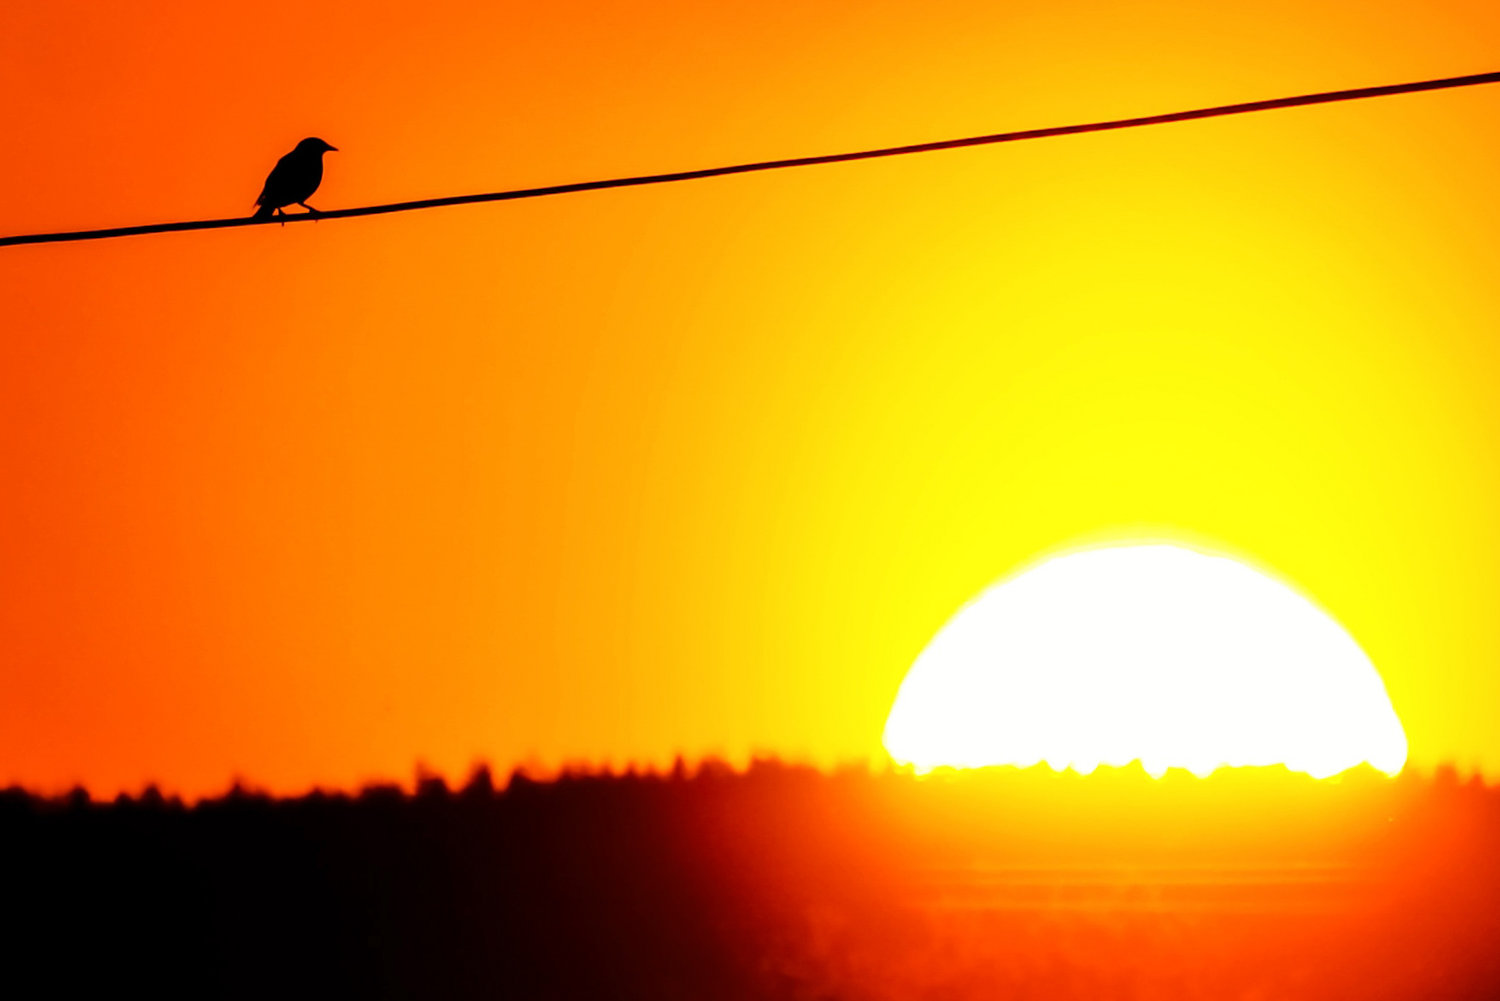 FILE PHOTO — A bird sits on a telephone wire as the sun begins to set in May 2018.